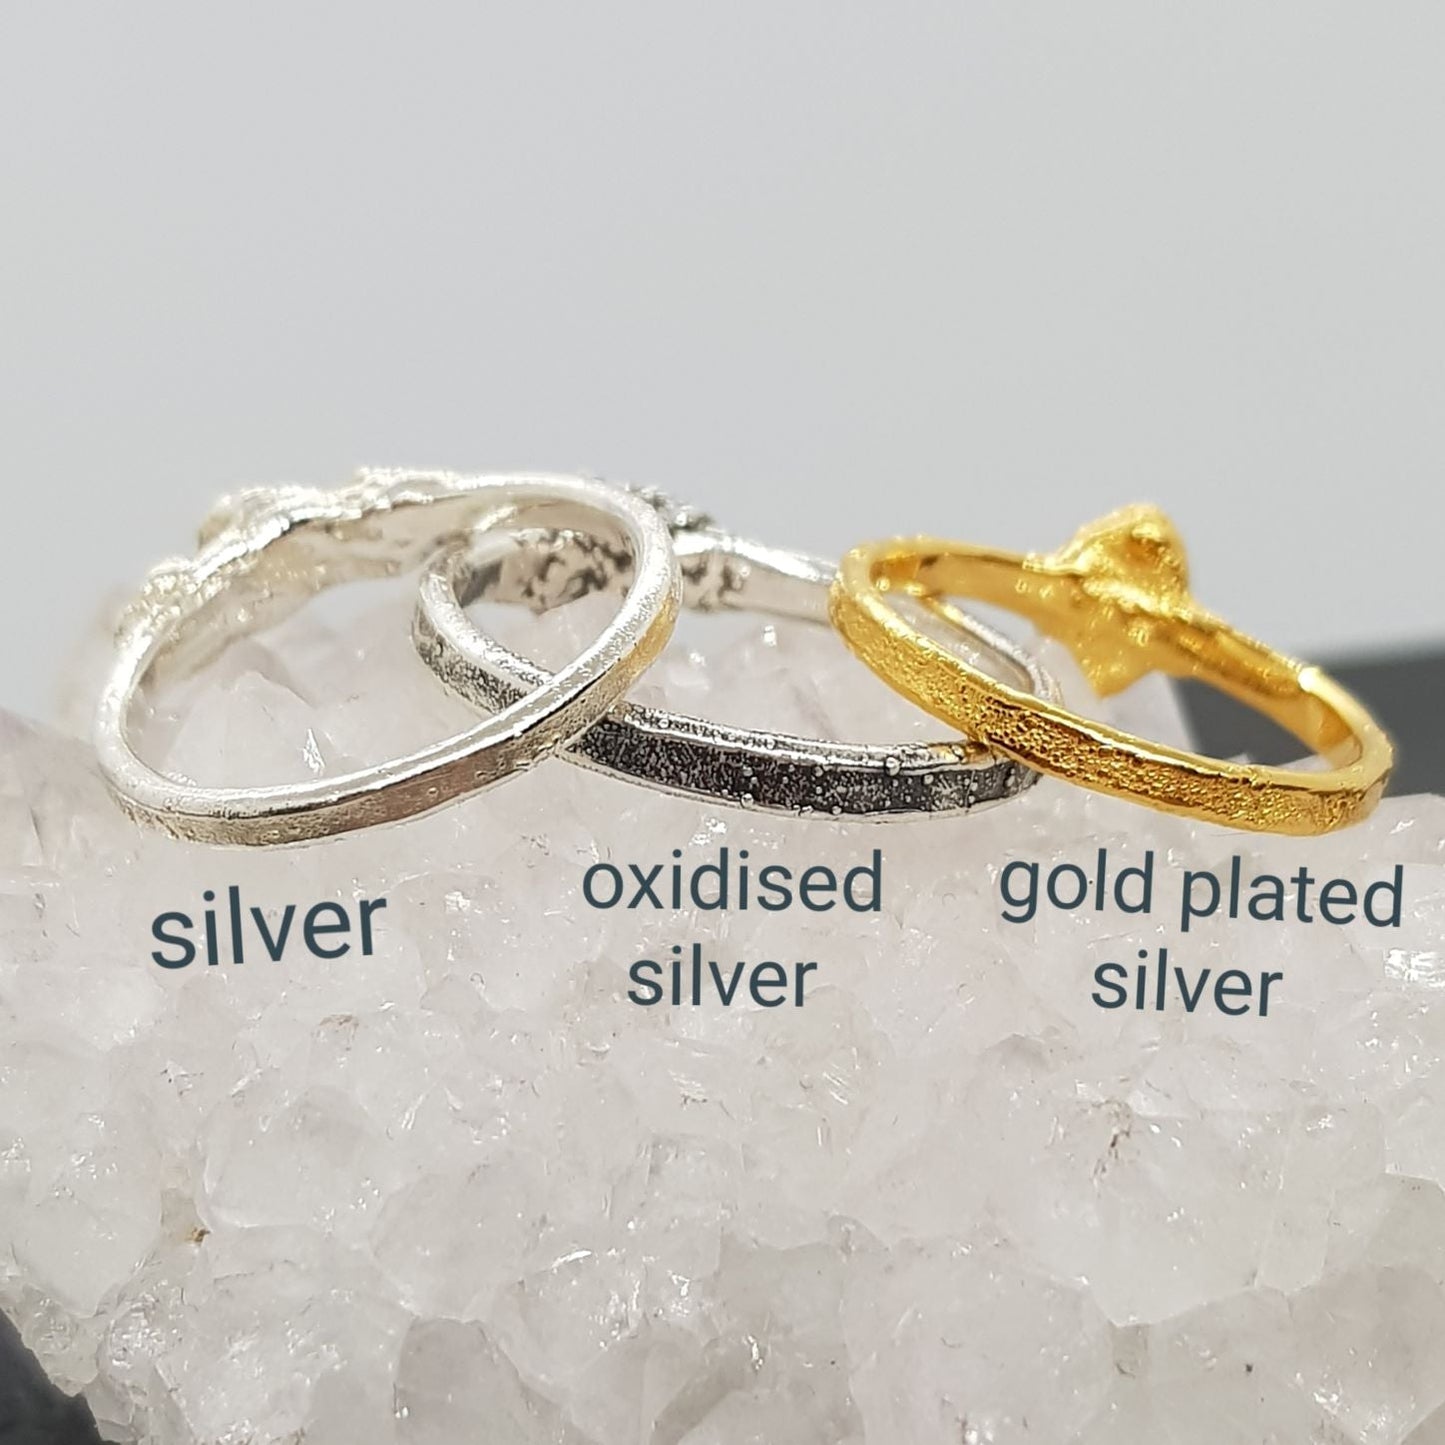 example of ring finishes - silver, oxidised silver and gold plated silver